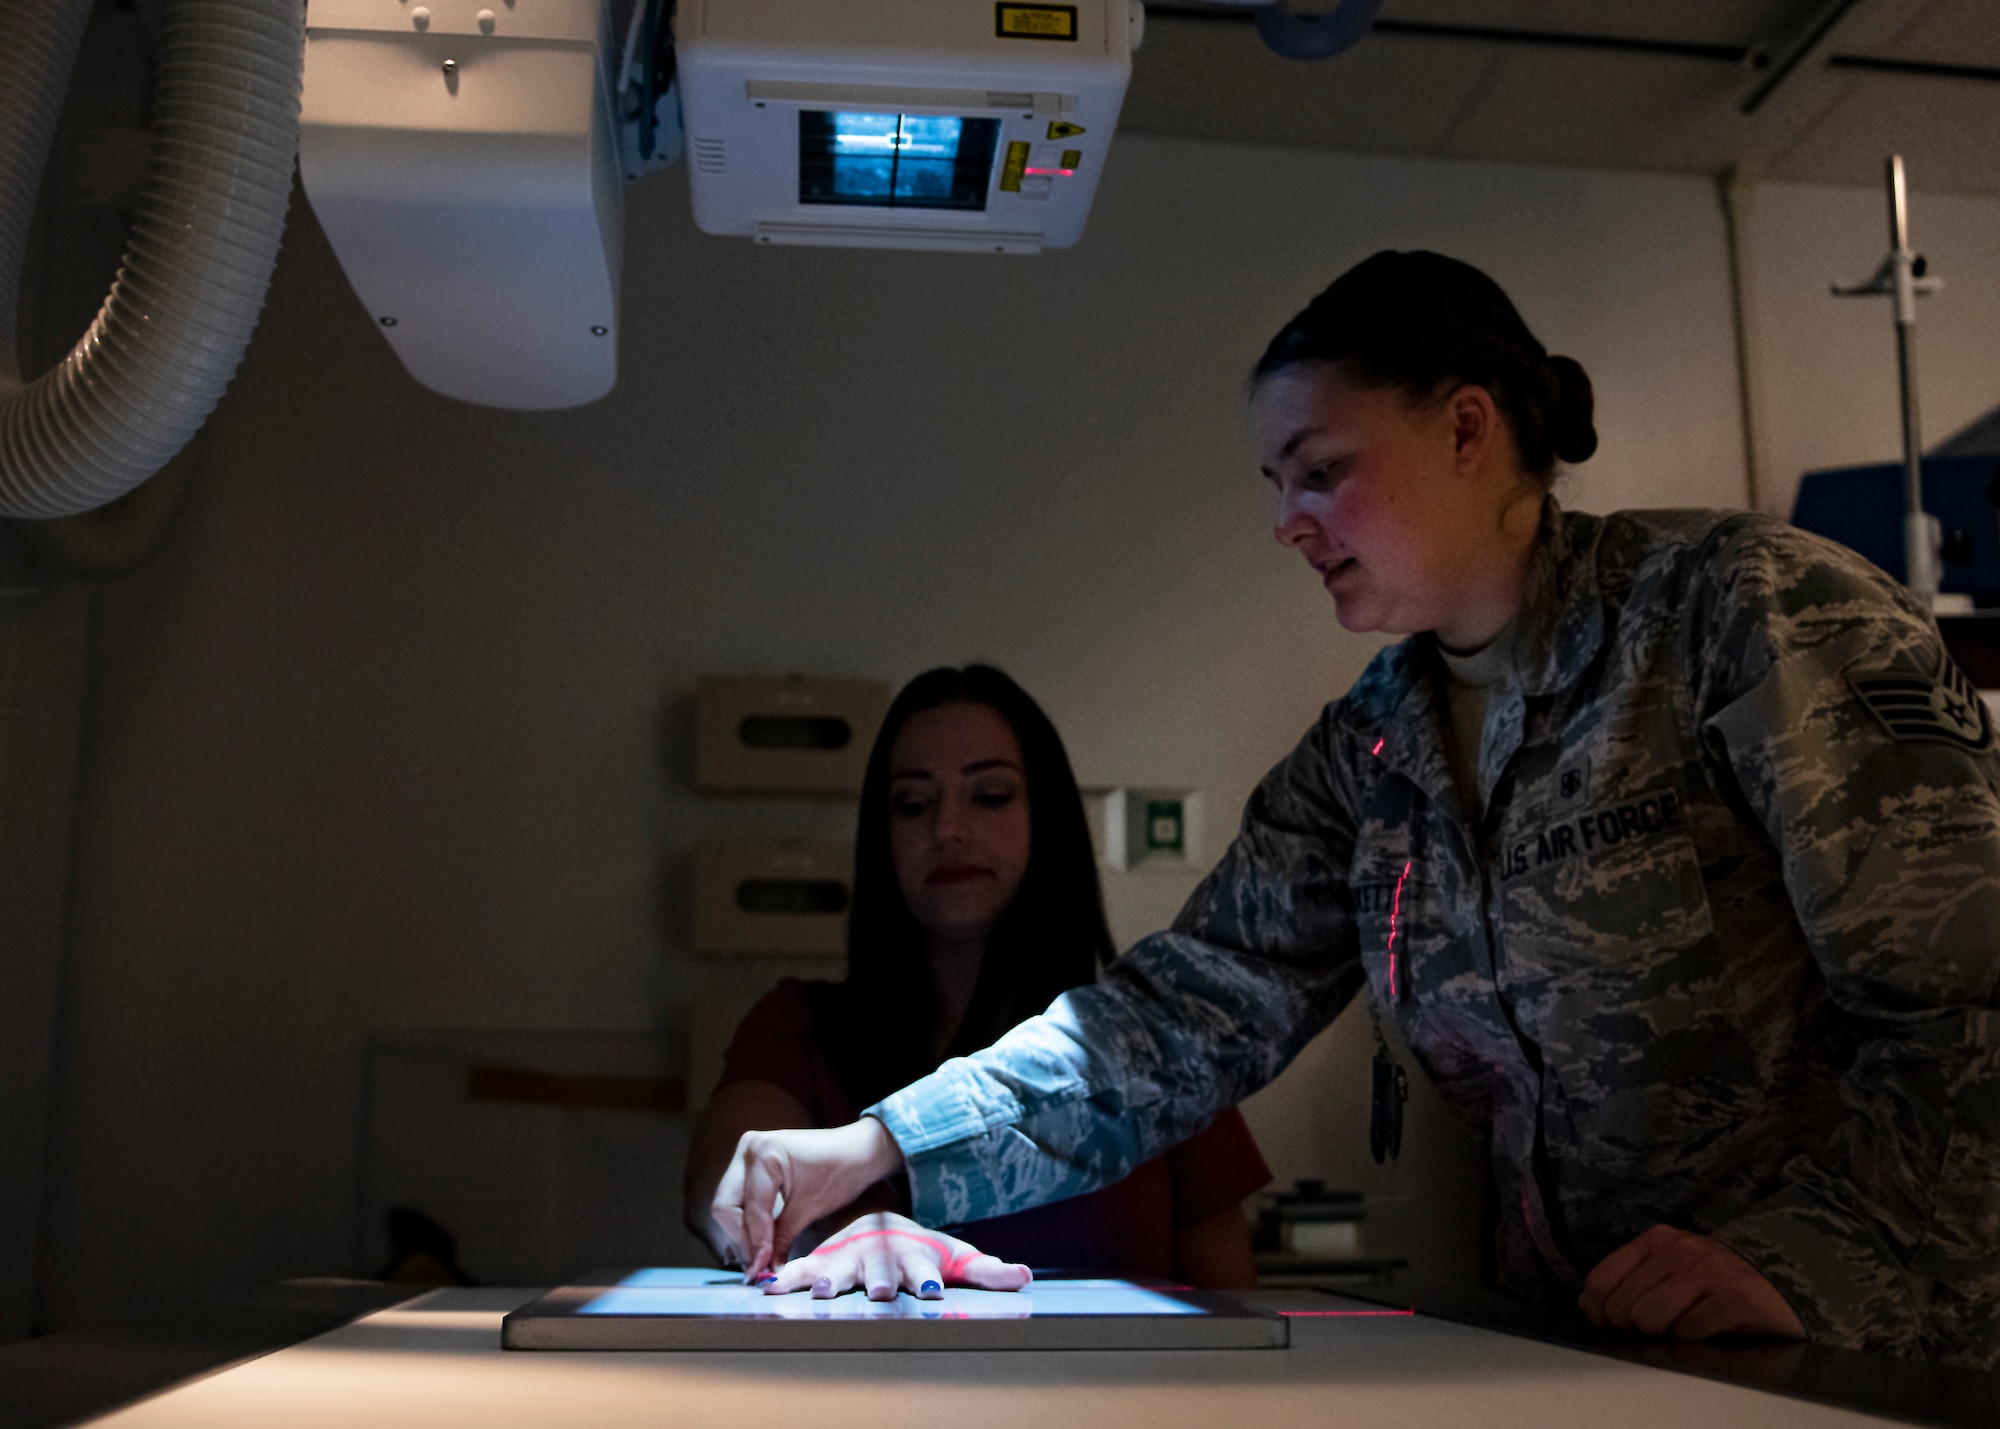 Brook Hutson, 82nd Medical Support Squadron registered diagnostic medical sonographer, gets her hand x-rayed by Staff Sgt. Morgan Burkett, diagnostic imaging Phase II student, at Sheppard Air Force Base, Texas, Sept. 12, 2019. Burkett is here at Sheppard for her clinical training upgrade which will upgrade her to a three level. Diagnostic imaging students start their training at Fort Sam Houston, TX, and will be sent to other bases (i.e. Sheppard) and will complete their training there. (U.S. Air Force photo by Airman 1st Class Pedro Tenorio)